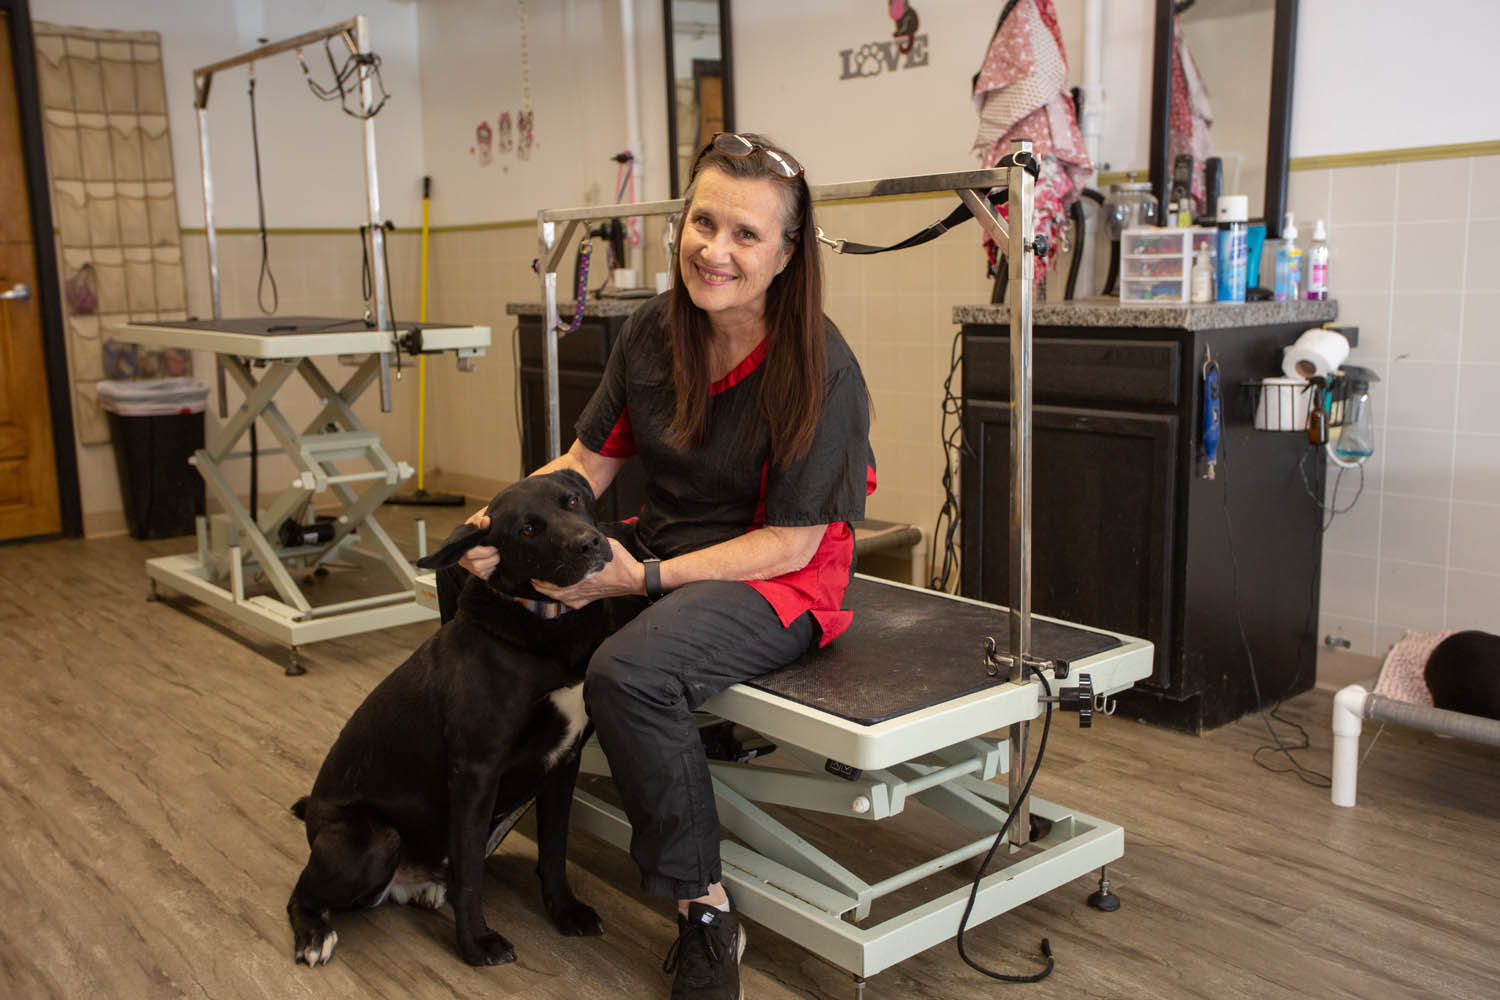 WOMAN’S BEST FRIEND: Charlene Smith, pictured with rescue foster dog Joe, is set to make facade upgrades at Doggie Styles Grooming in Nixa.